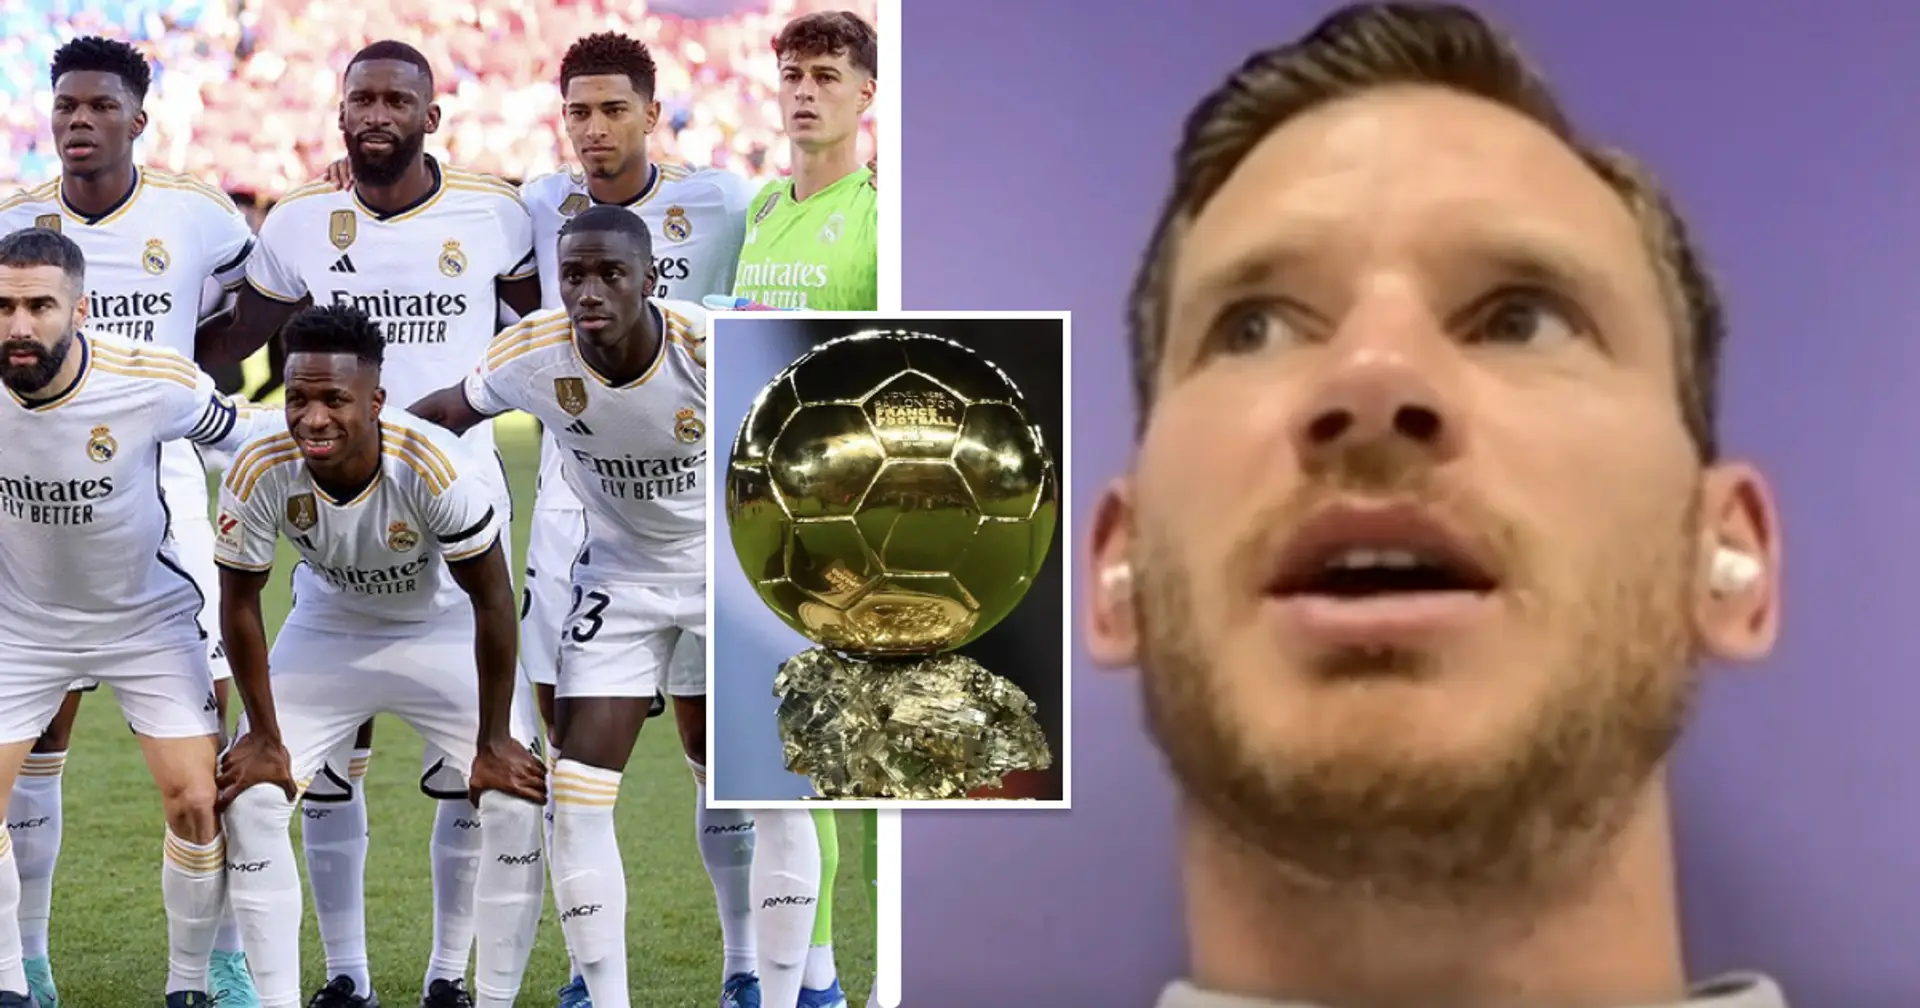 'I don't think it's going to be two guys dominating': Vertonghen backs two Real Madrid players to compete for Ballon d'Or